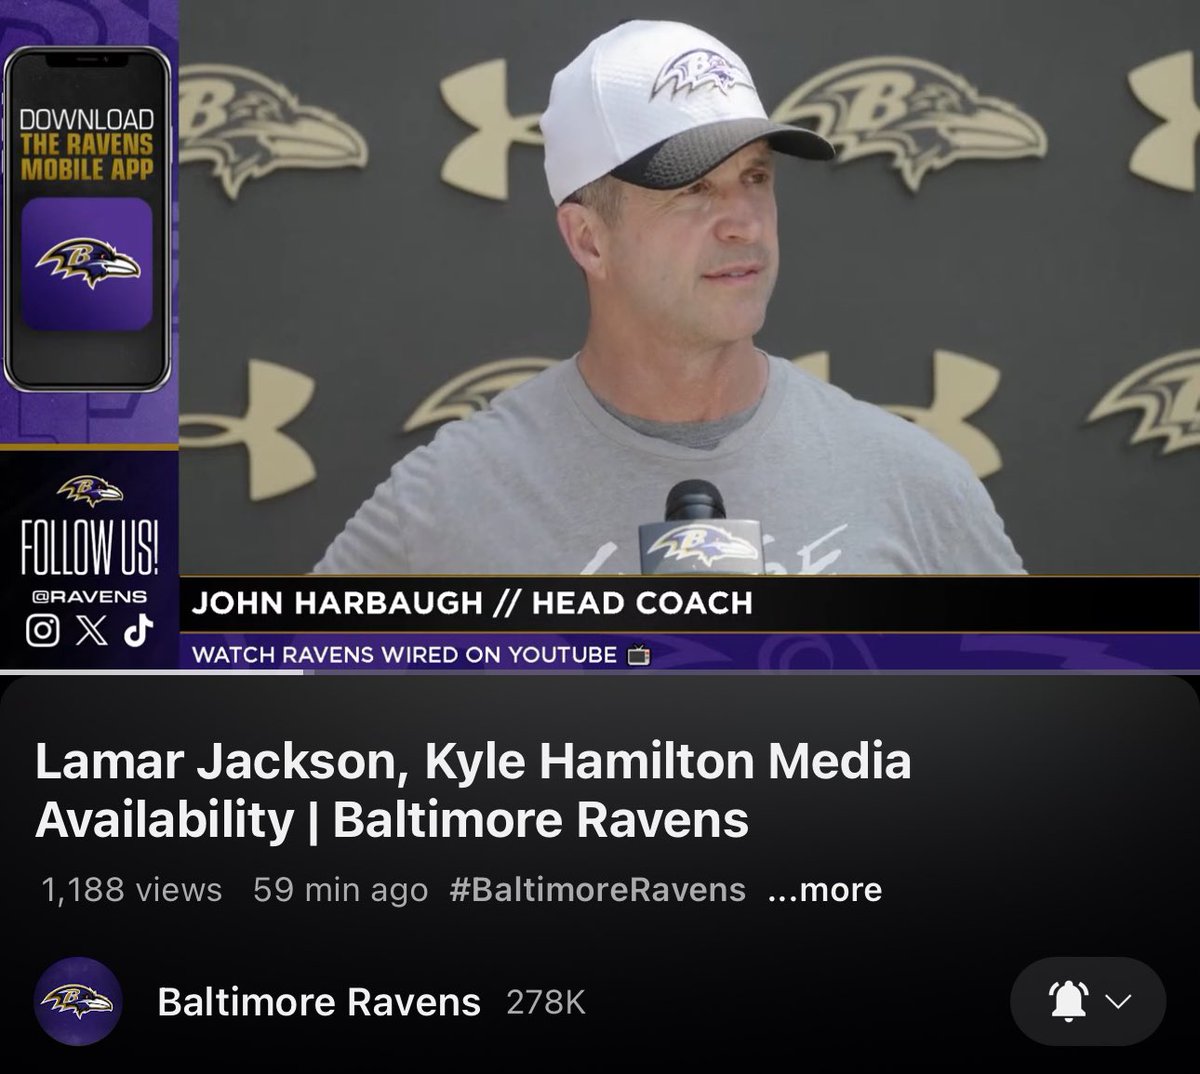 they tried to hide John Harbaugh’s presser amongst the players, they don’t want his coachspeak to reach the humble fantasy masses‼️ not on my Swatch